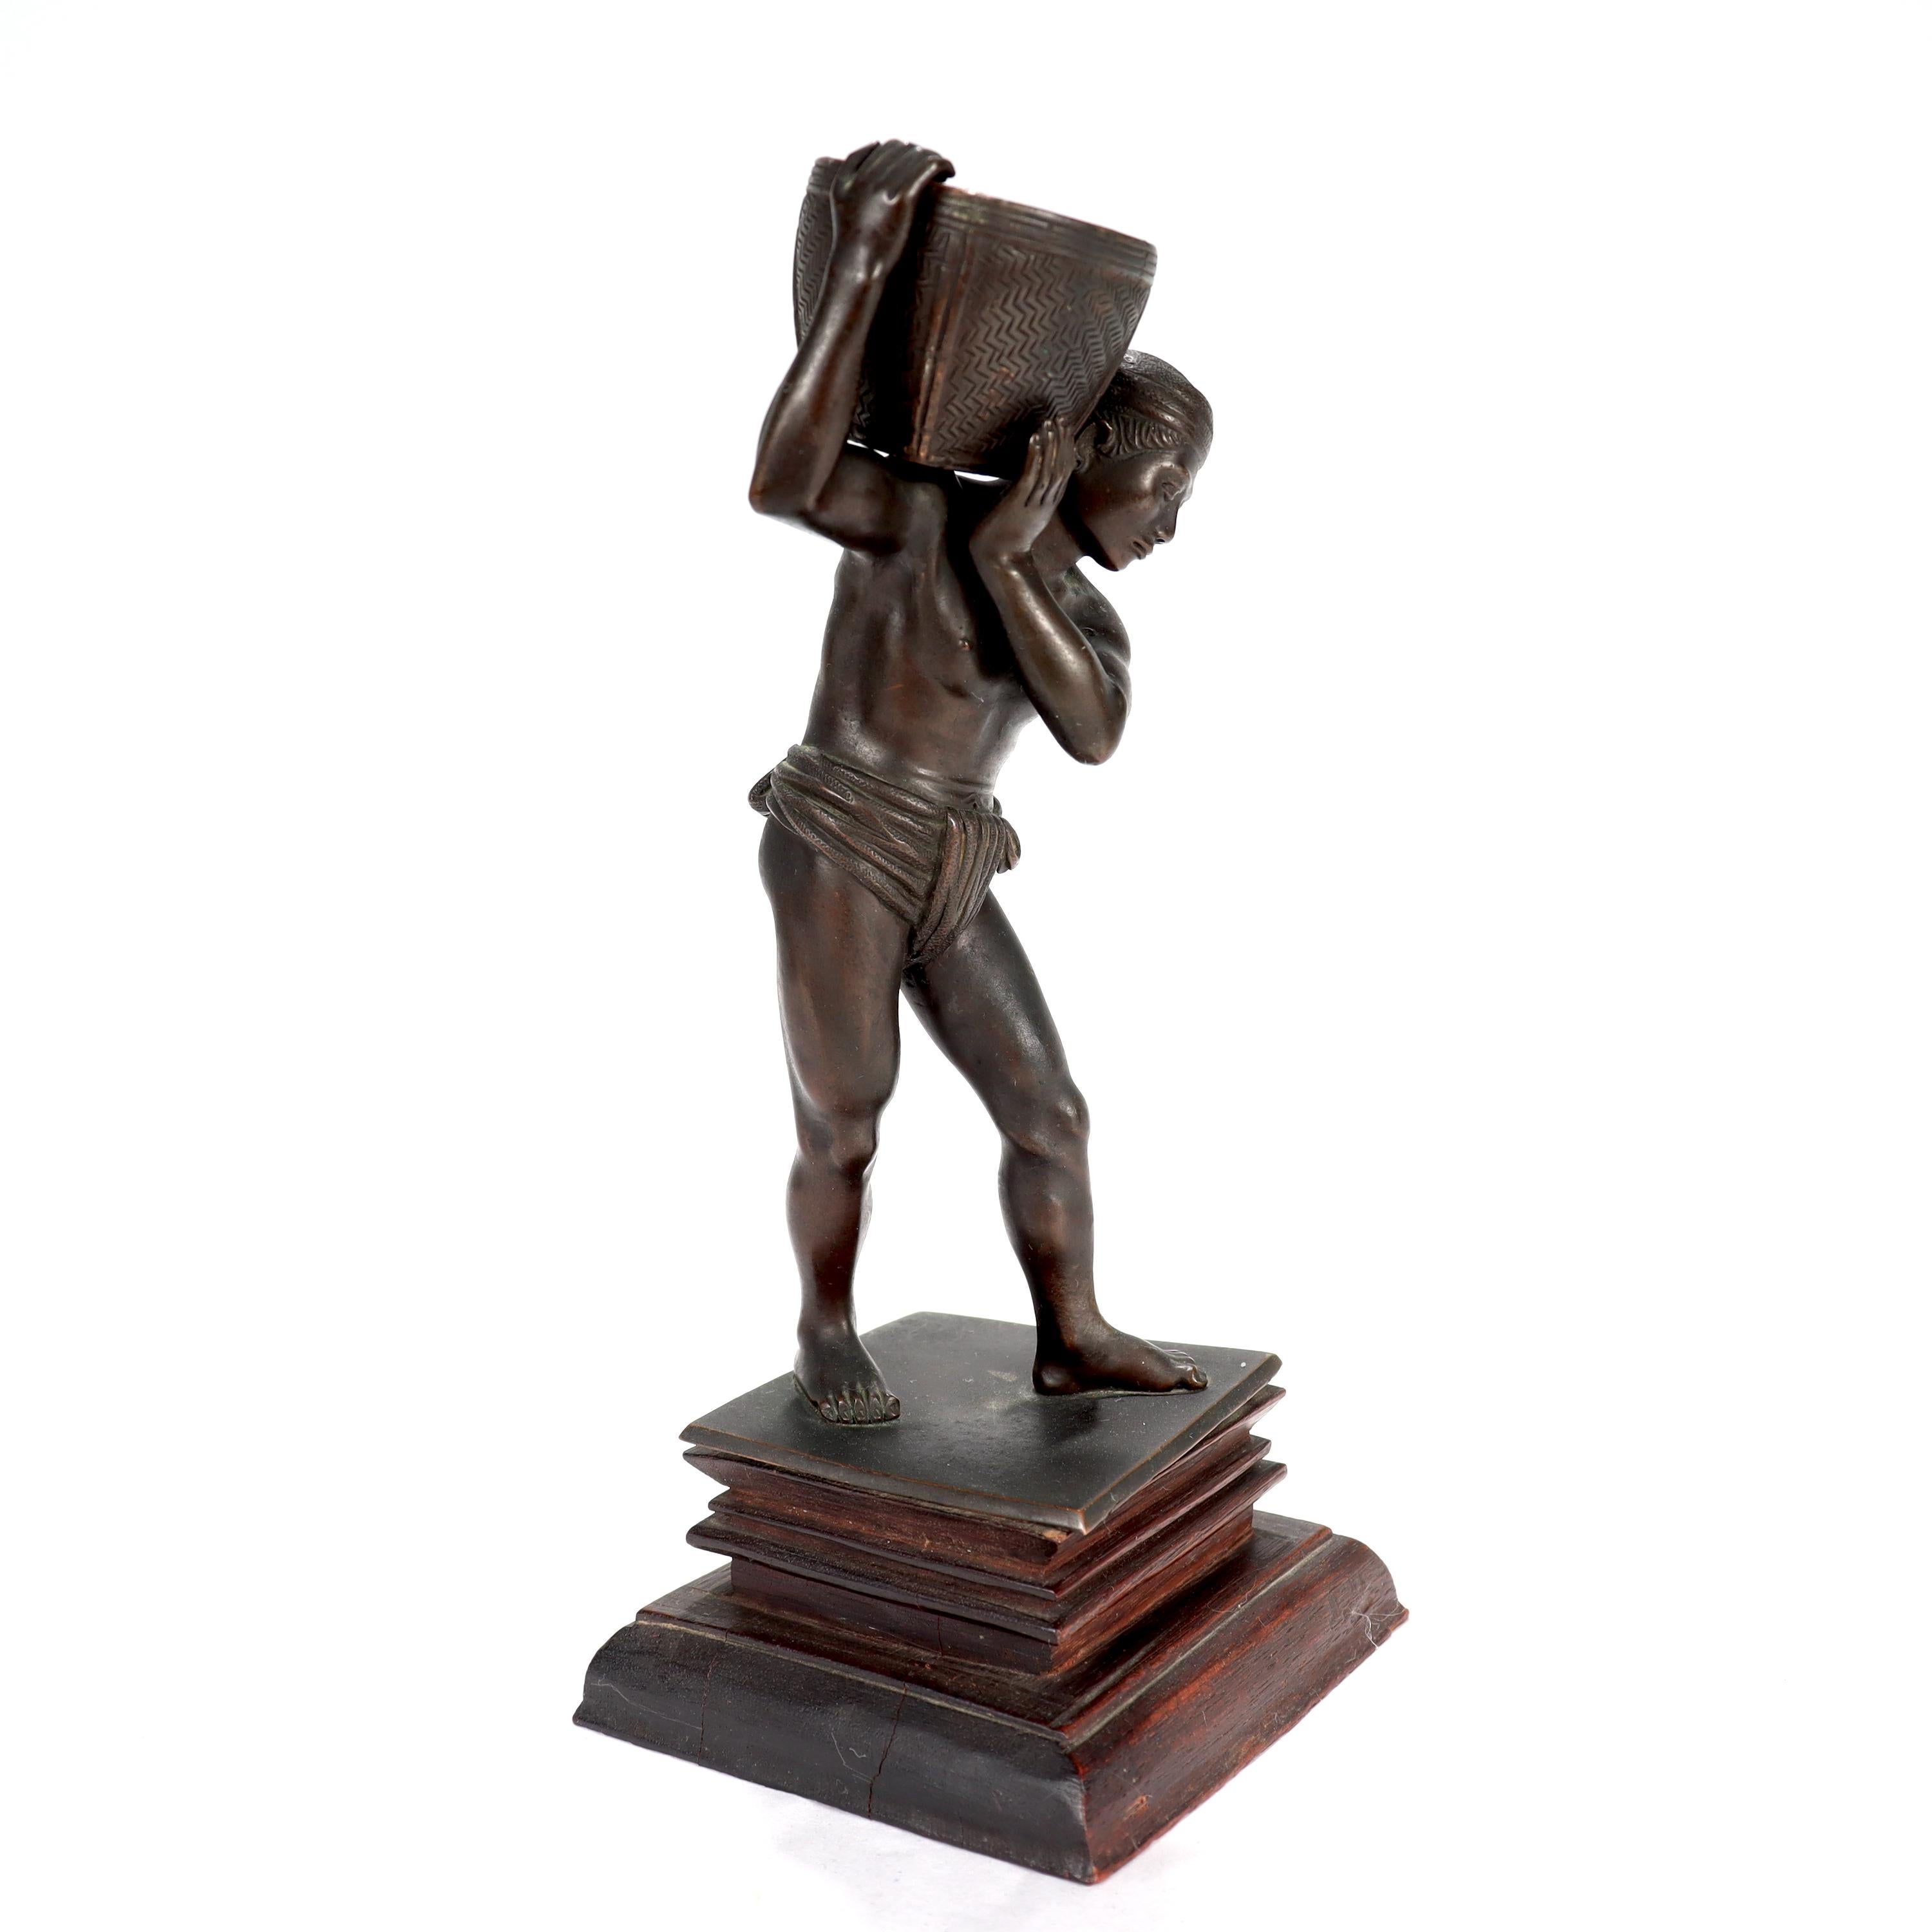 A fine old or antique Pegu bronze sculpture or statue.

In the form of a man in loincloth and headwrap holding a basket on his right shoulder (perhaps a water carrier). 

Secured to a conforming, carved wooden plinth with a bolt.

(The basket